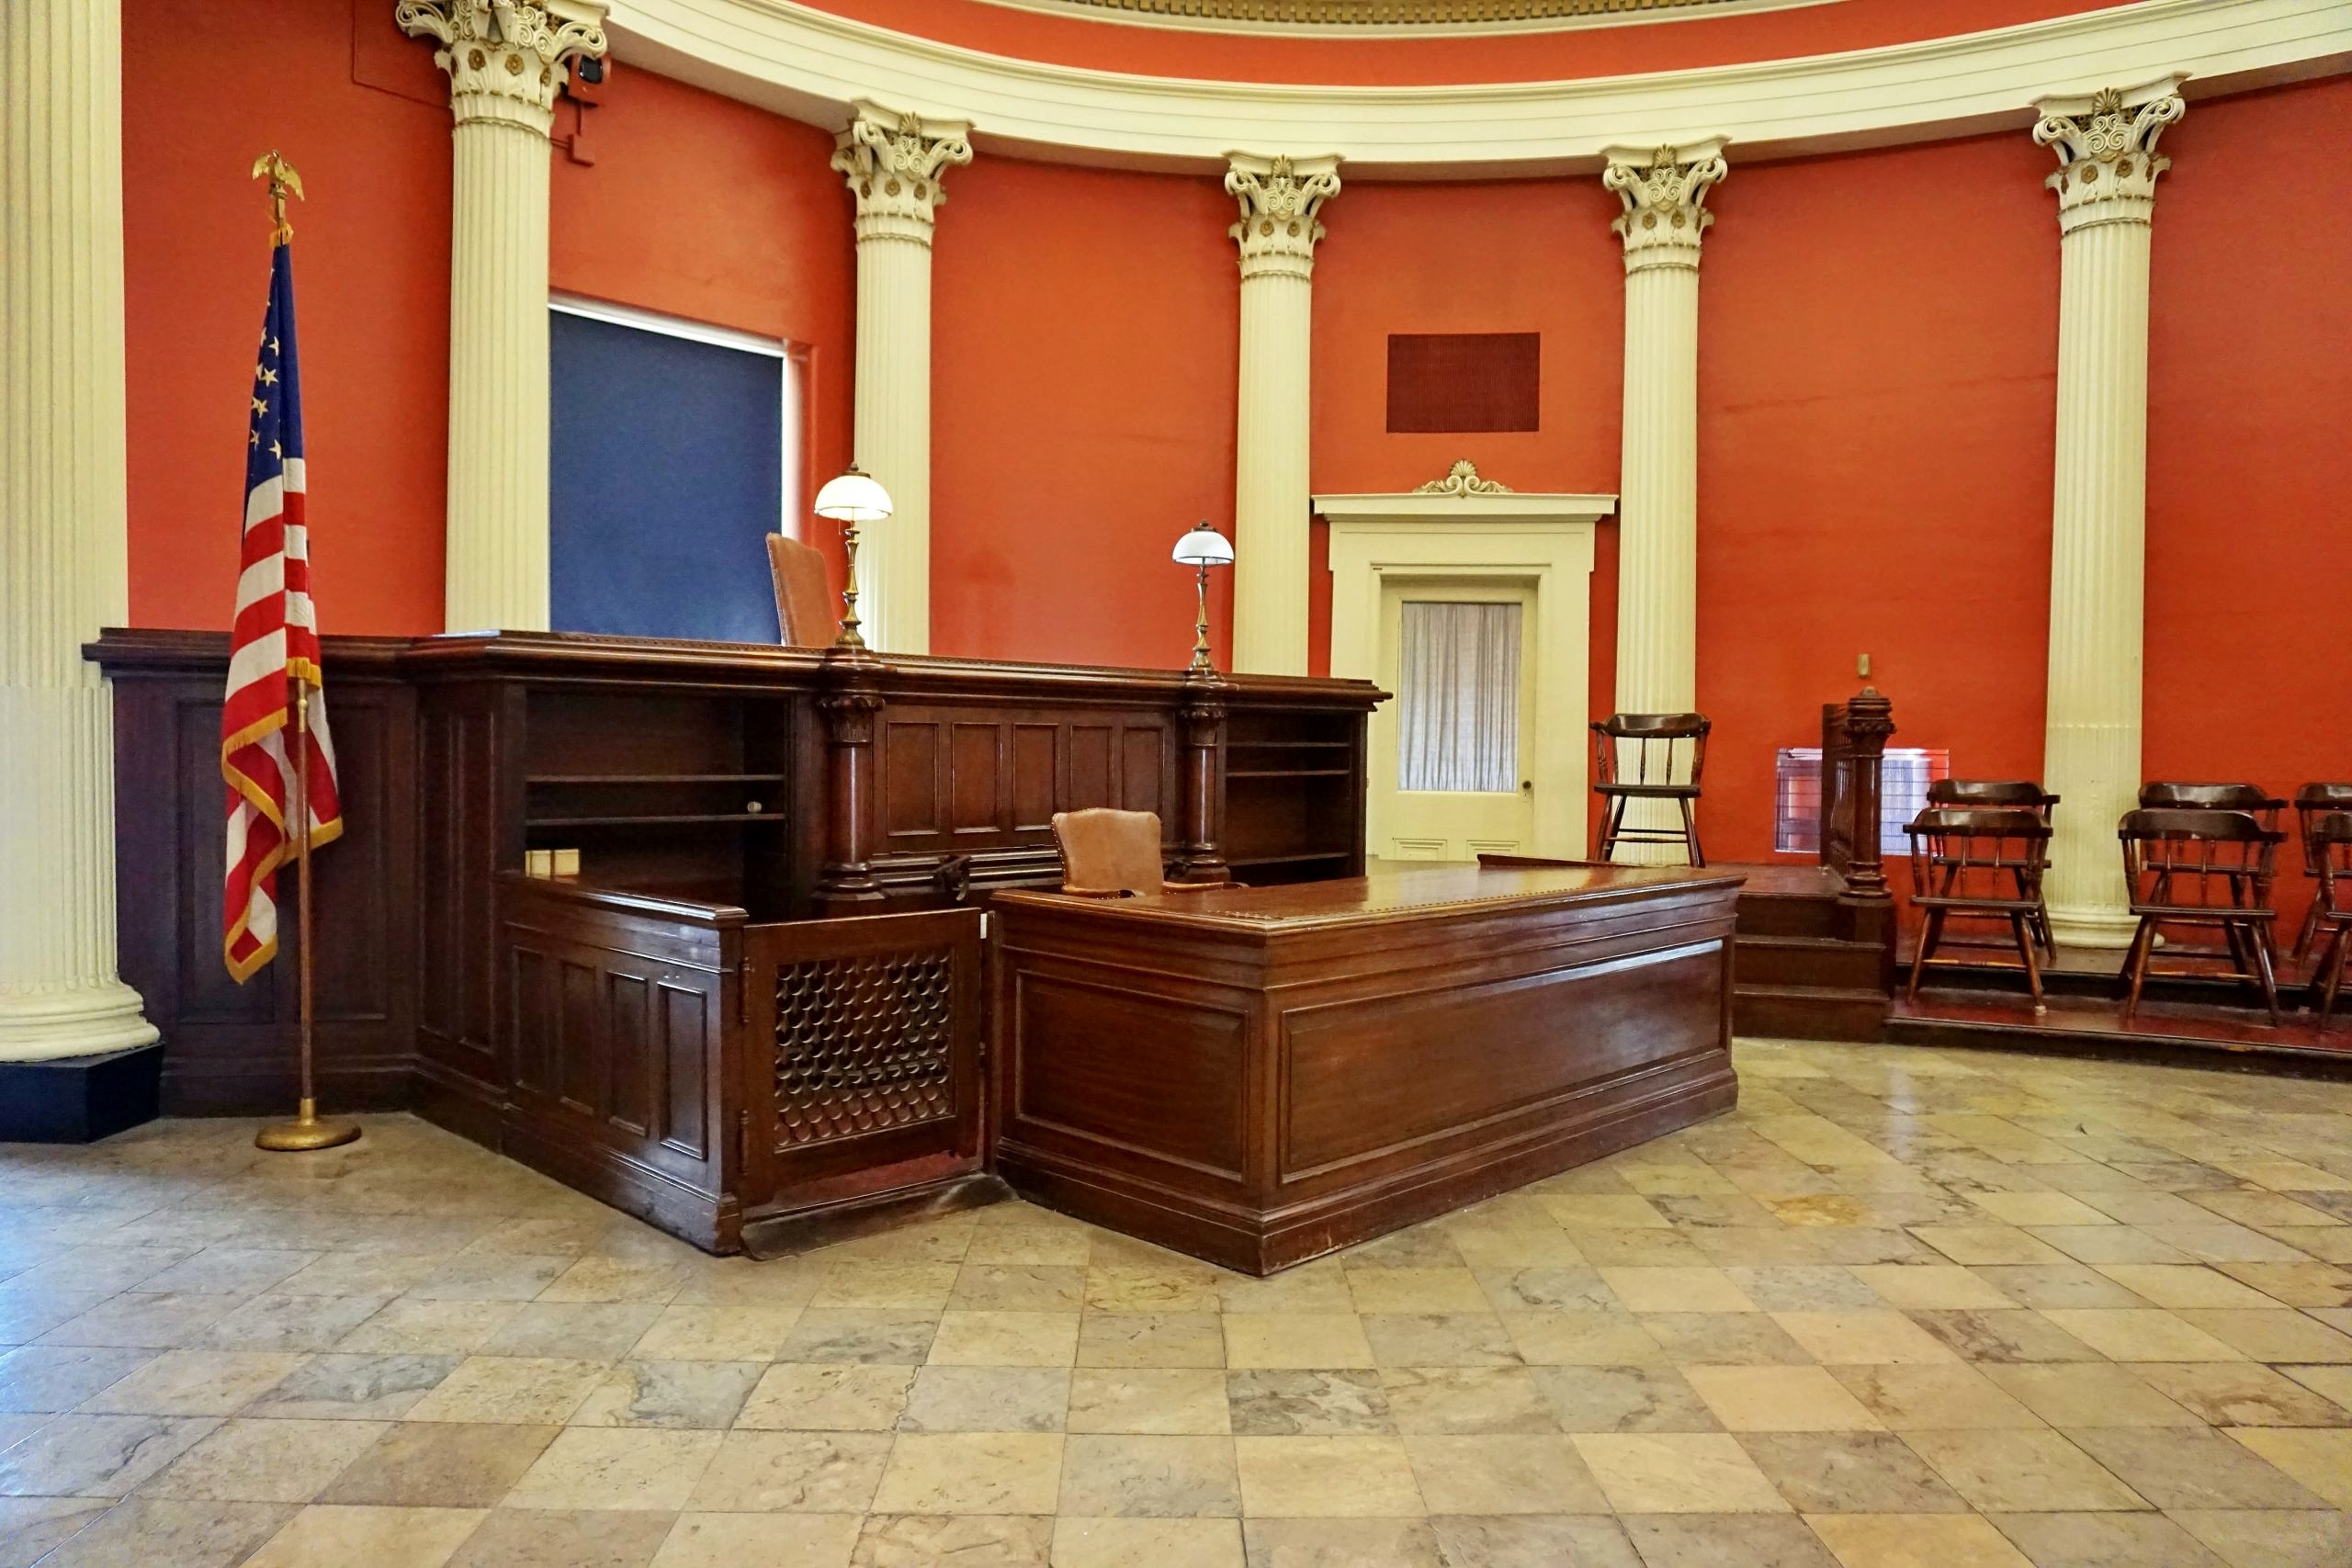 A photo of an empty courtroom showing the judge's bench, a witness stand, and the jury box